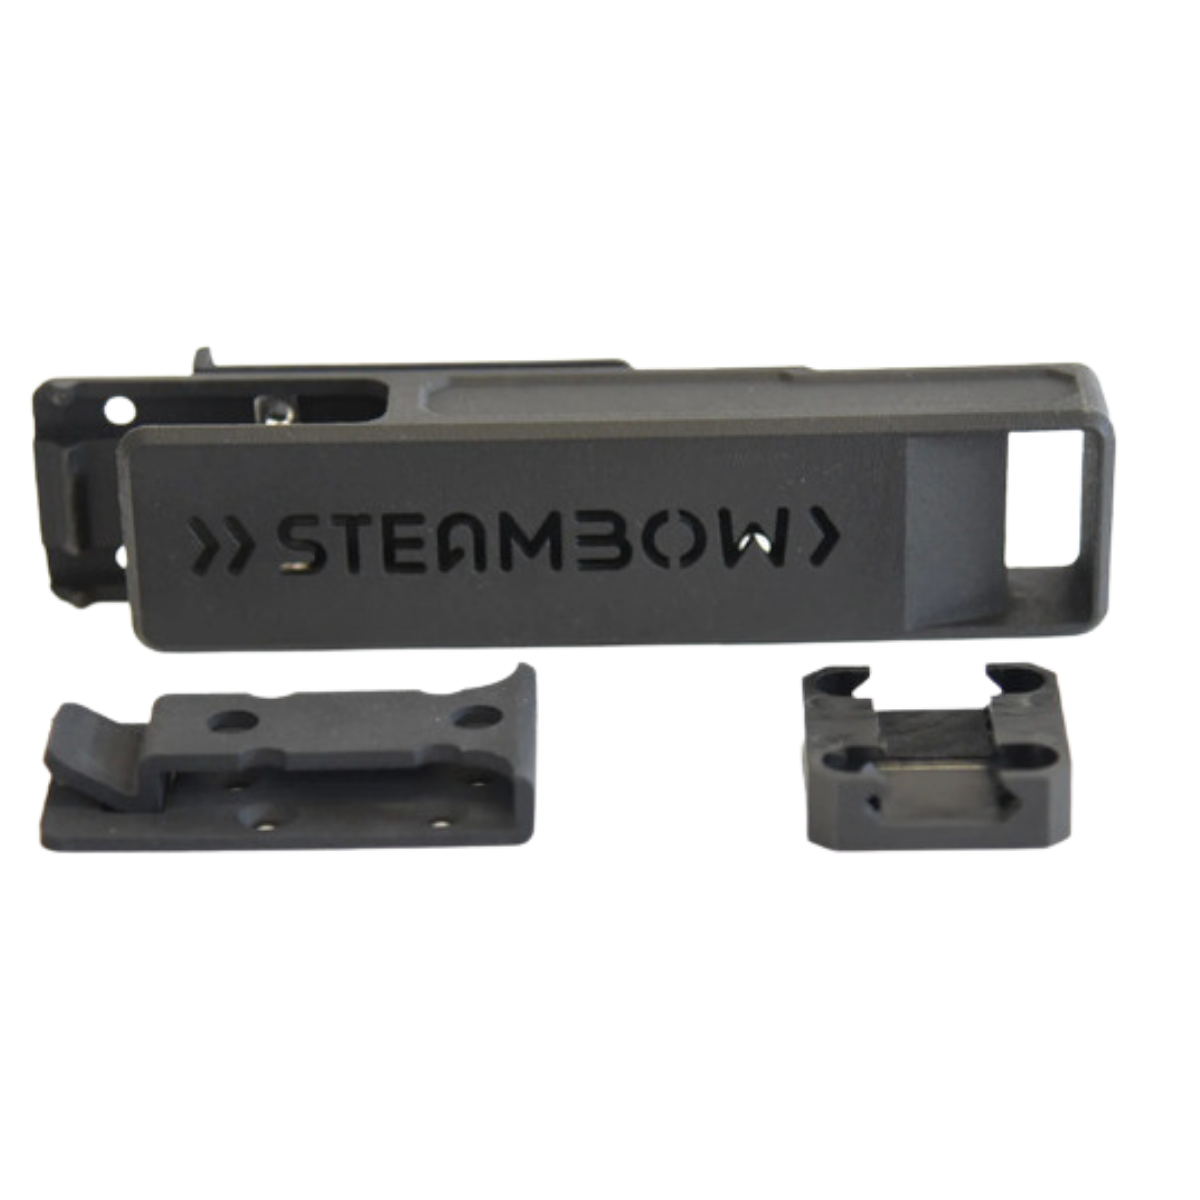 Steambow Pouch for Speedloader incl. Belt Clip & Picatinny Mount - Fast UK Shipping | Tactical Archery UK